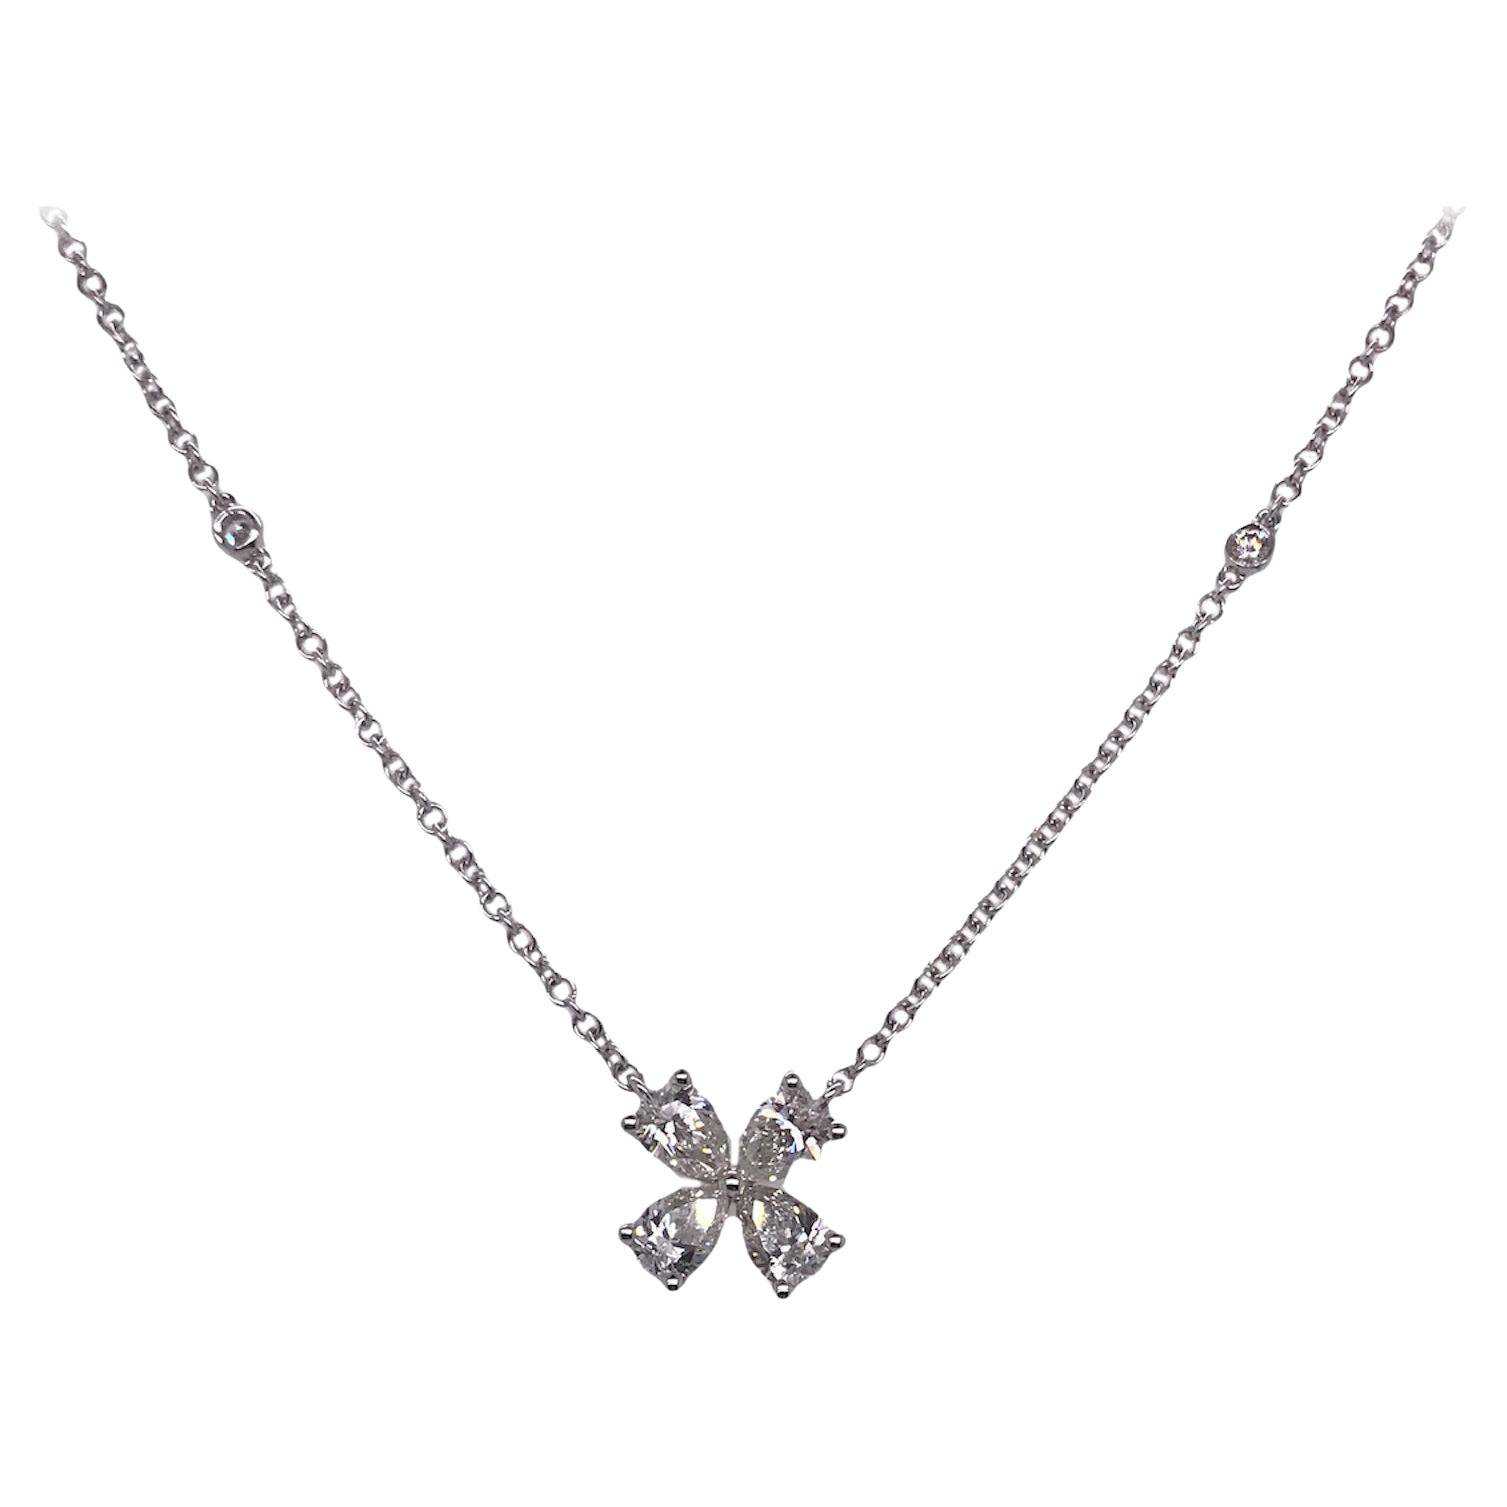 1.34 Carat Pear Shape Natural Diamond Necklace in 18k White Gold ref2083 For Sale